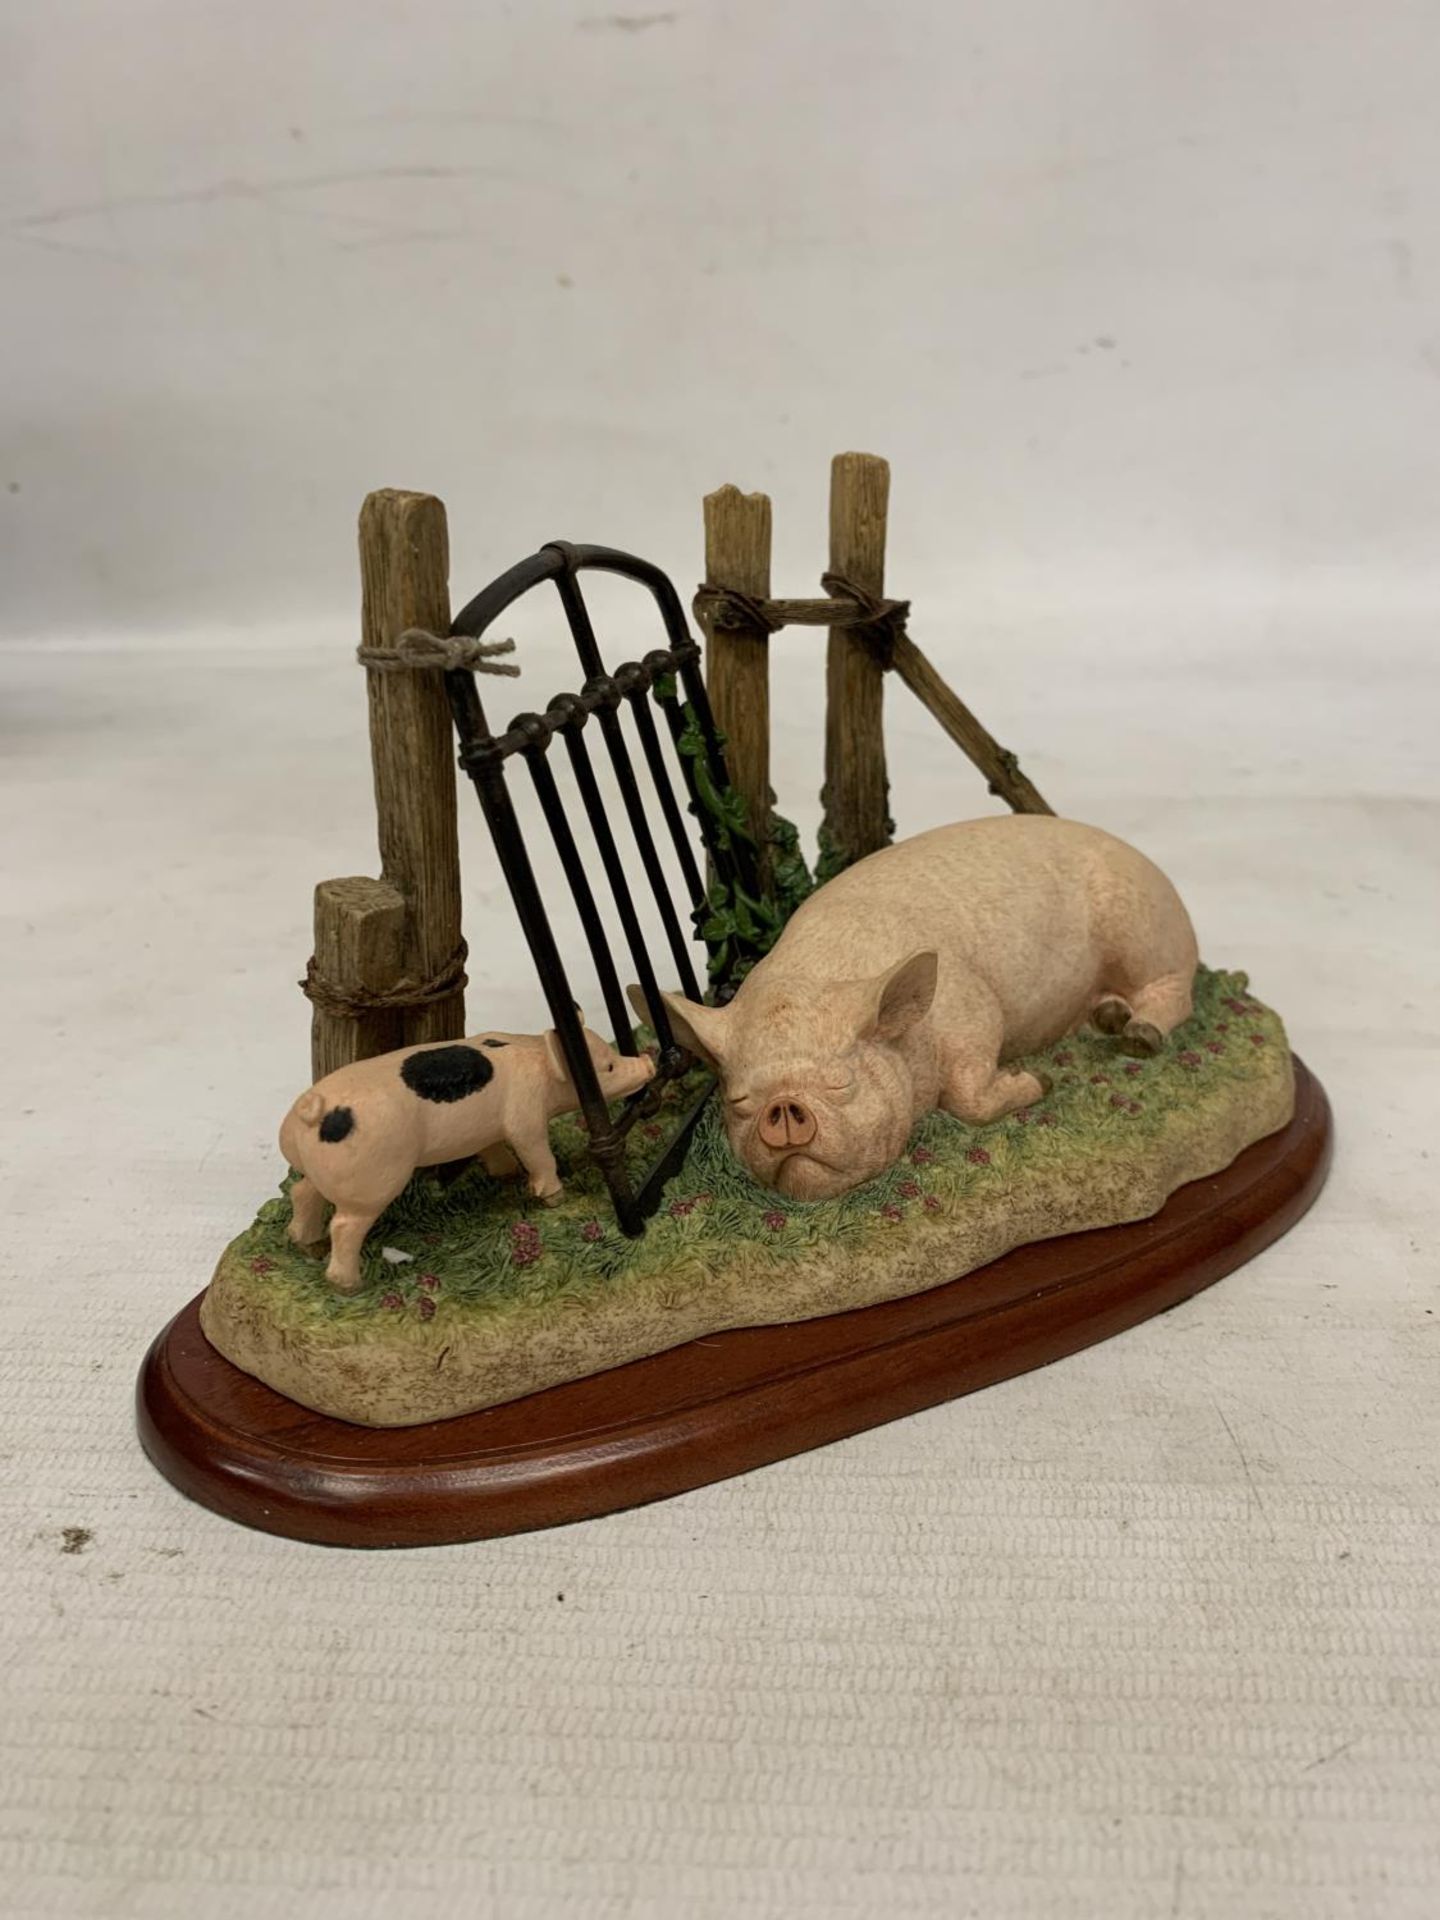 A BORDER FINE ARTS JAMES HERRIOT STUDIO FIGURINES A3705 "IN CLOVER" WITH BOX - Image 3 of 5